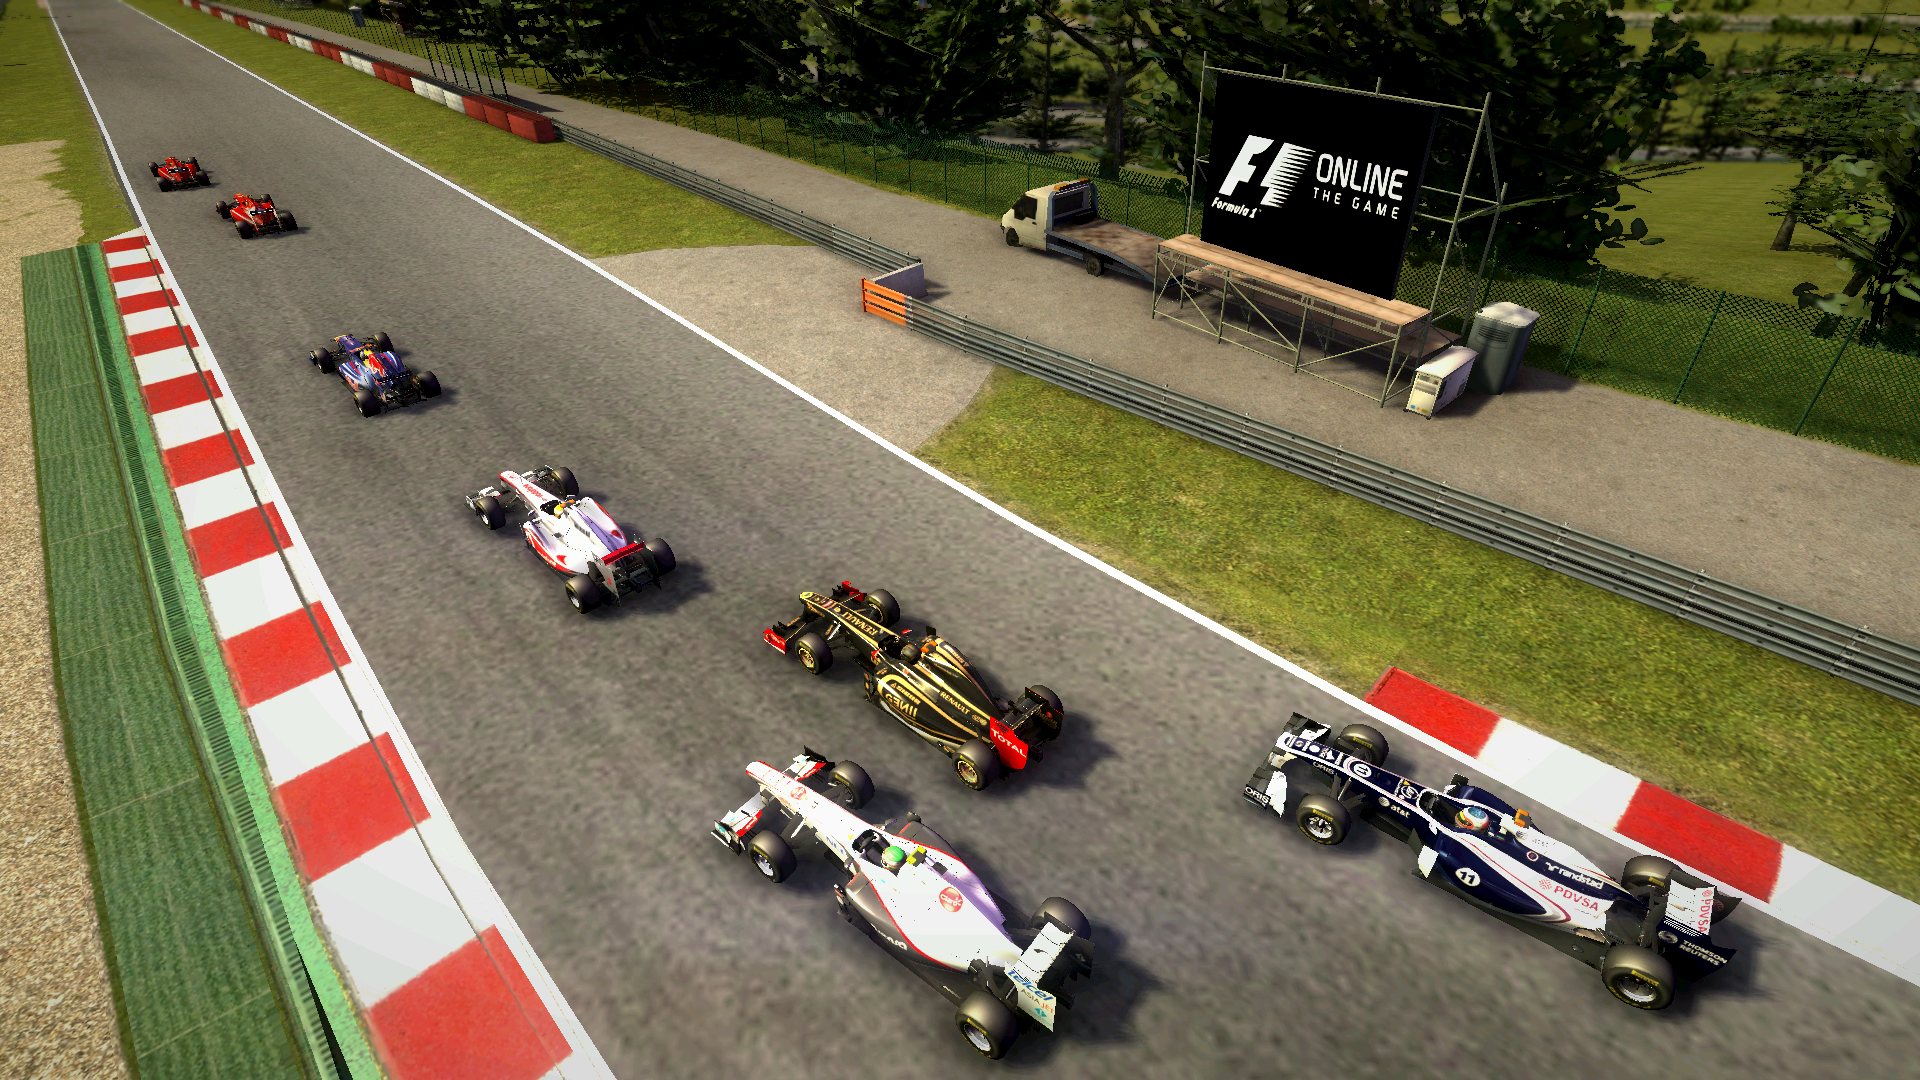 F1 Online The Game preview